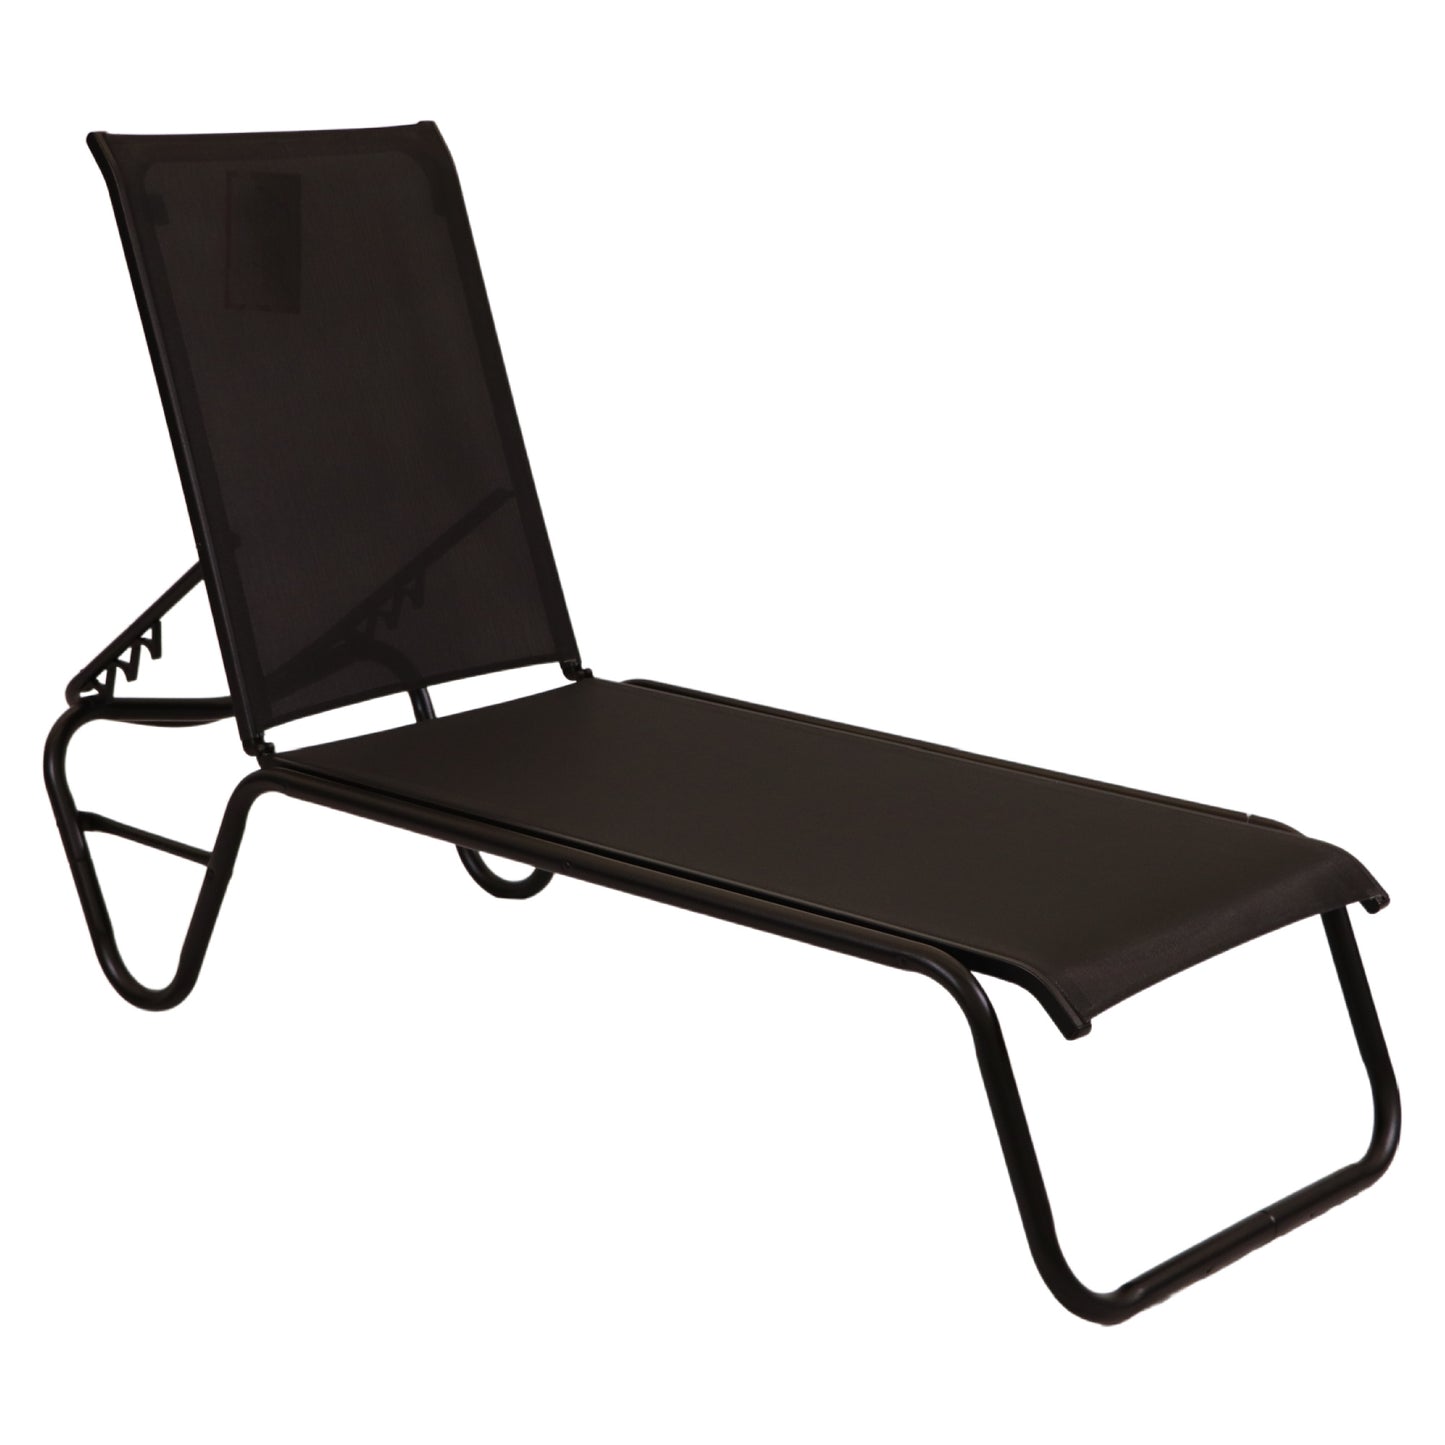 Gardenella Four-Position Stacking Armless Chaise